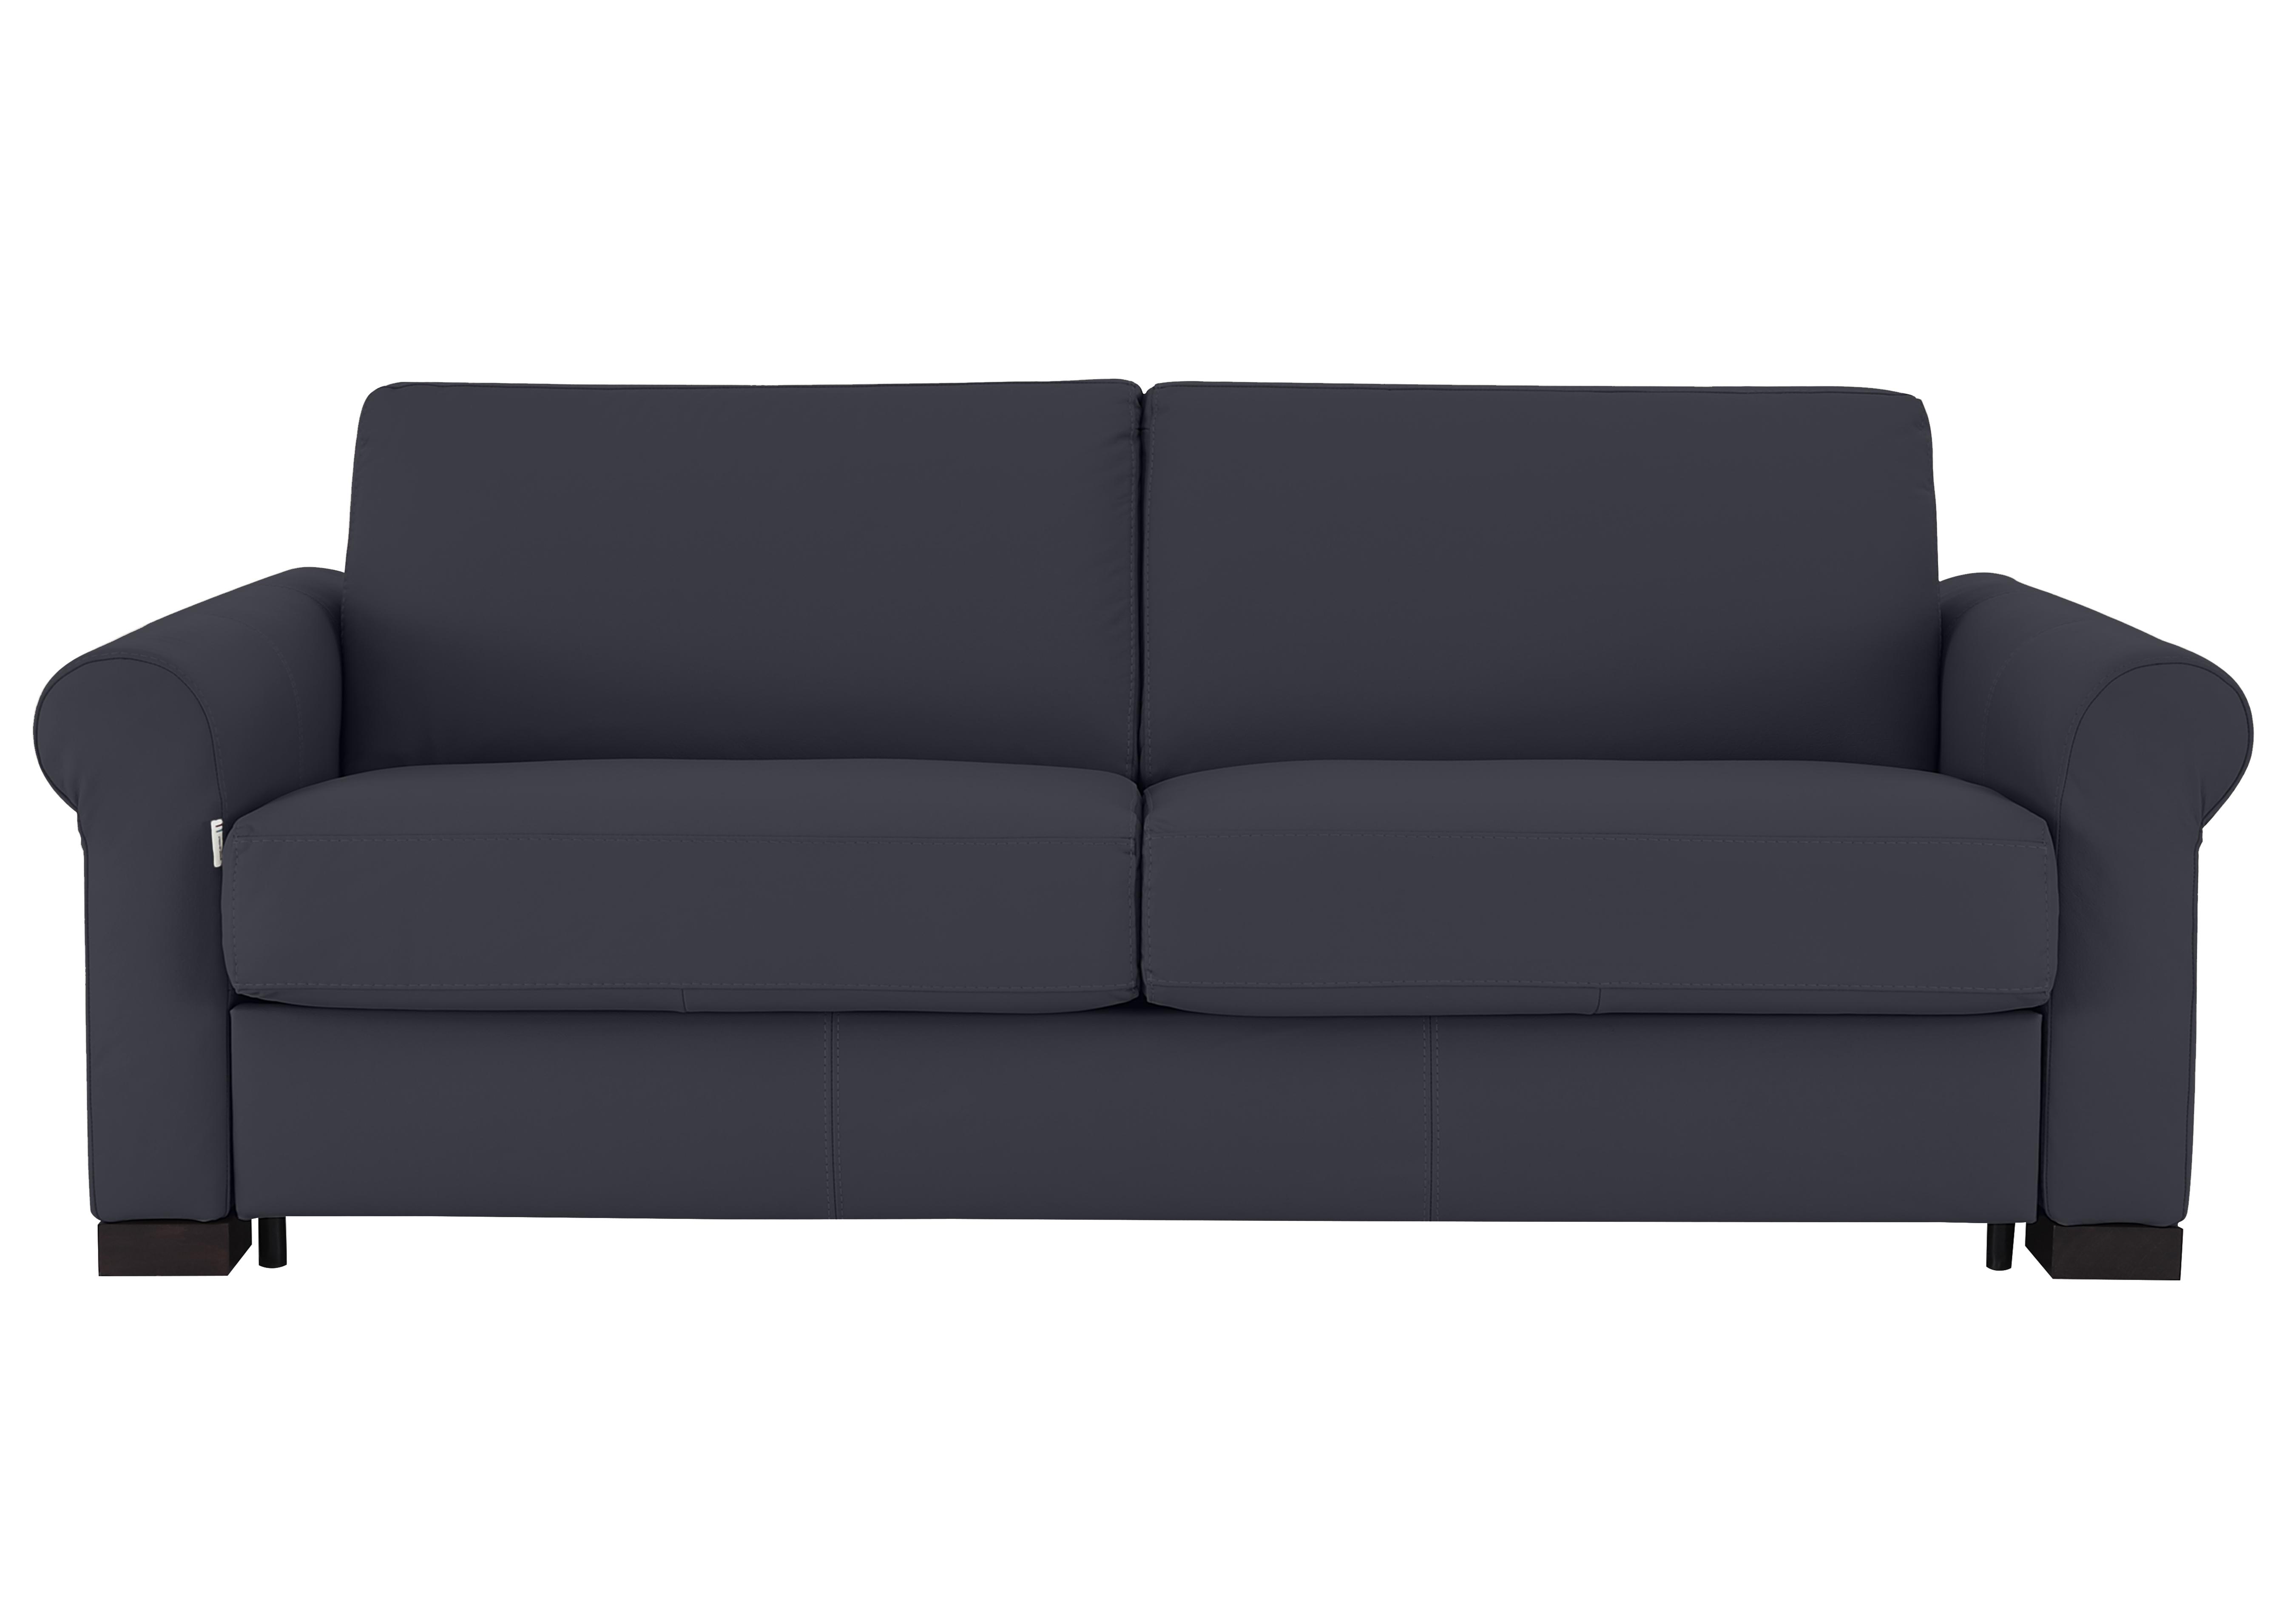 Alcova 3 Seater Leather Sofa Bed with Scroll Arms in Torello Blu 81 on Furniture Village